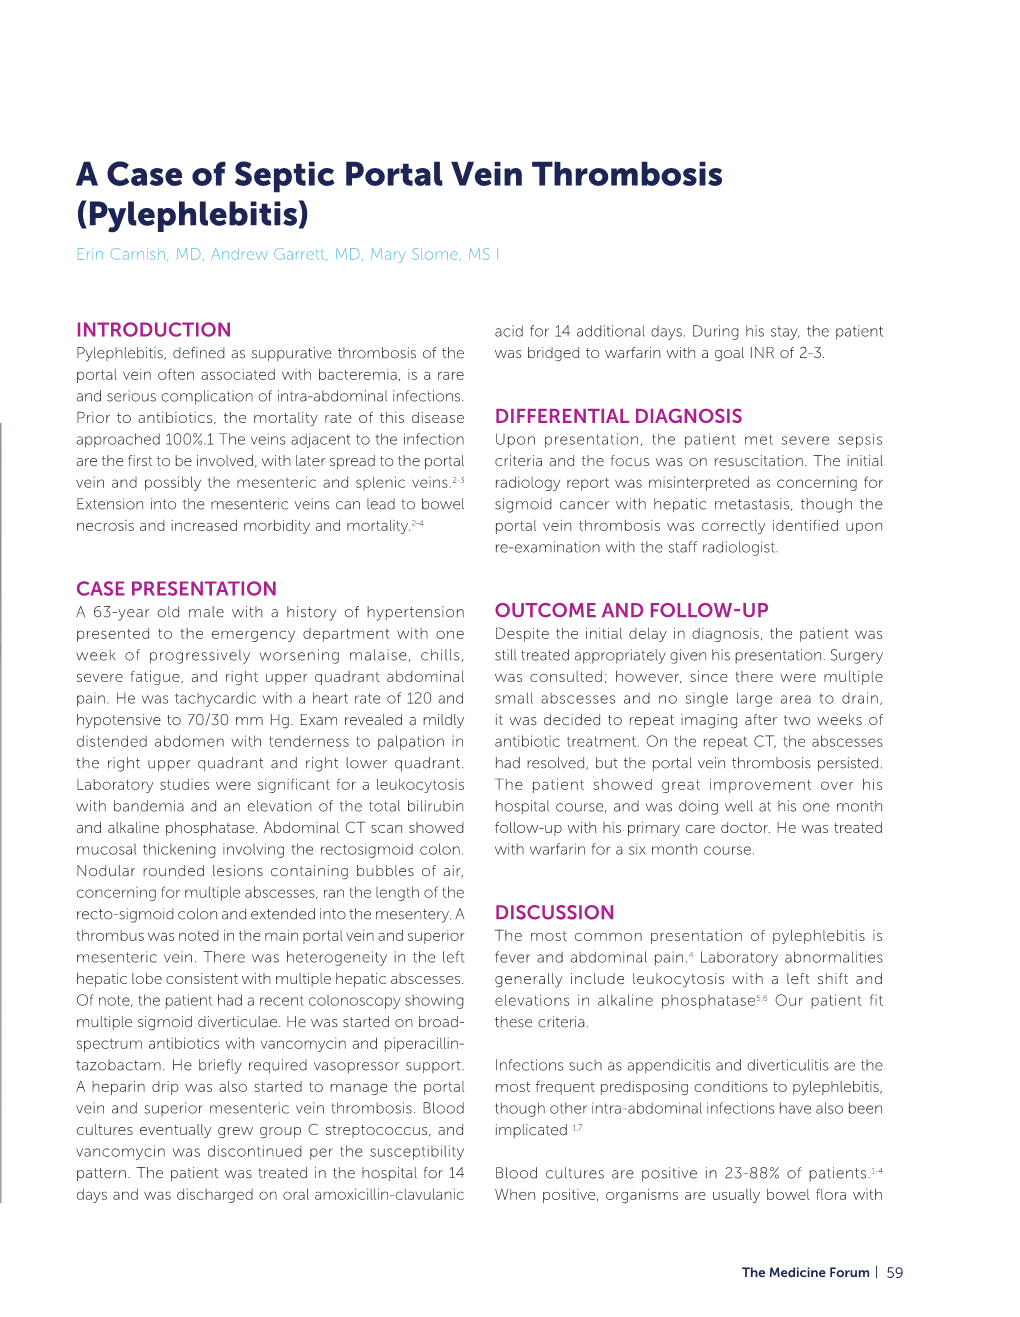 A Case of Septic Portal Vein Thrombosis (Pylephlebitis) Erin Carnish, MD, Andrew Garrett, MD, Mary Slome, MS I